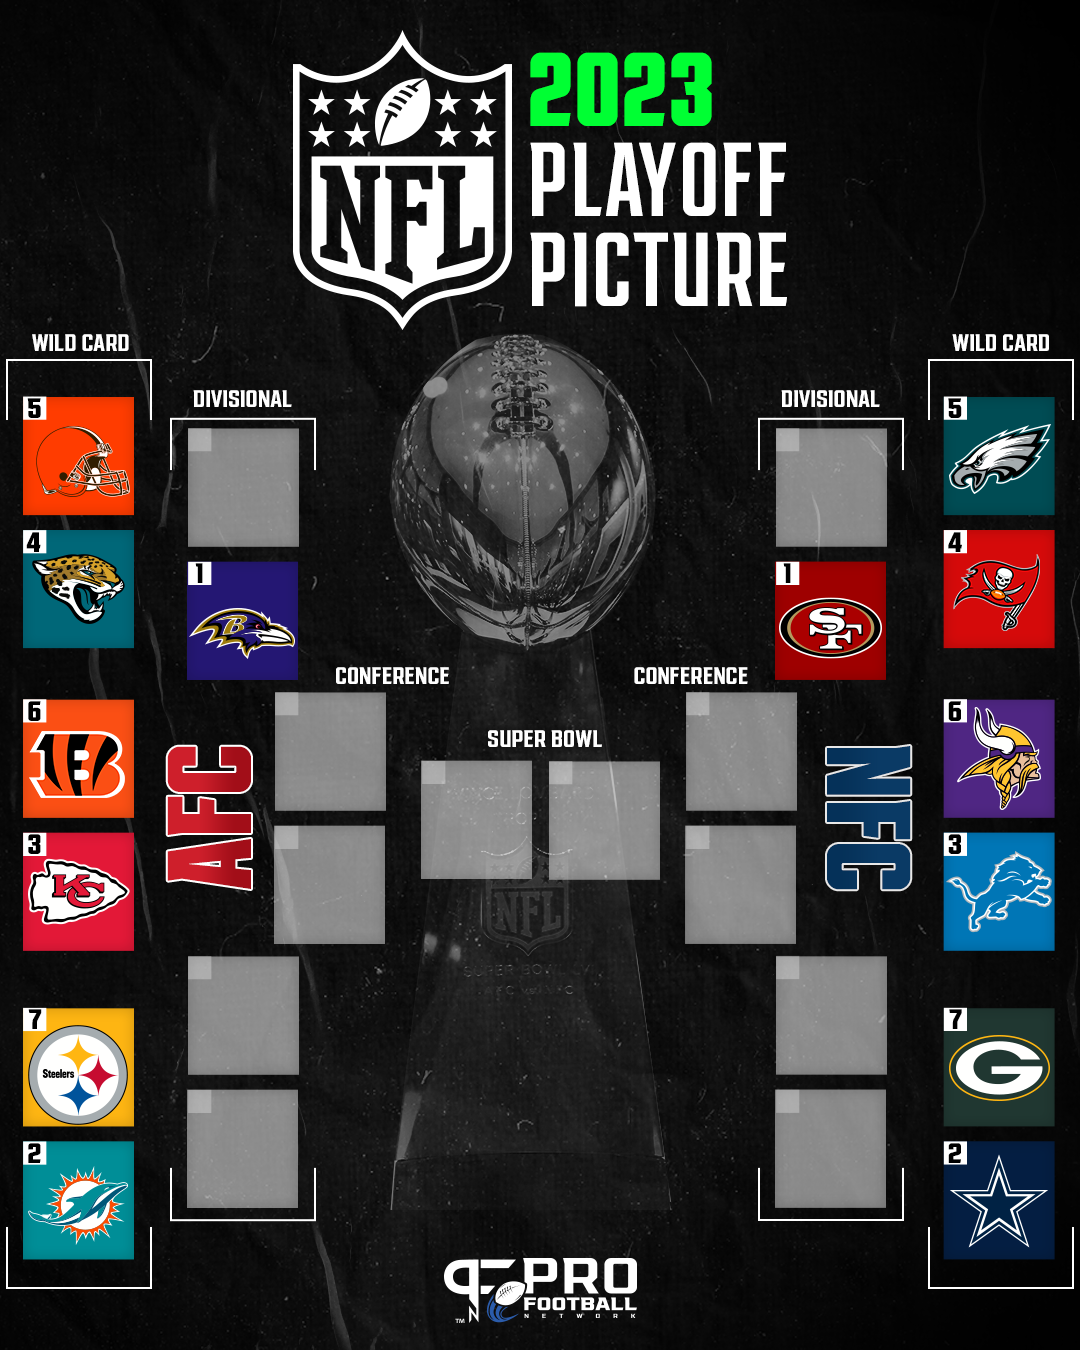 Afc Playoff Picture 2023 2024 Image to u